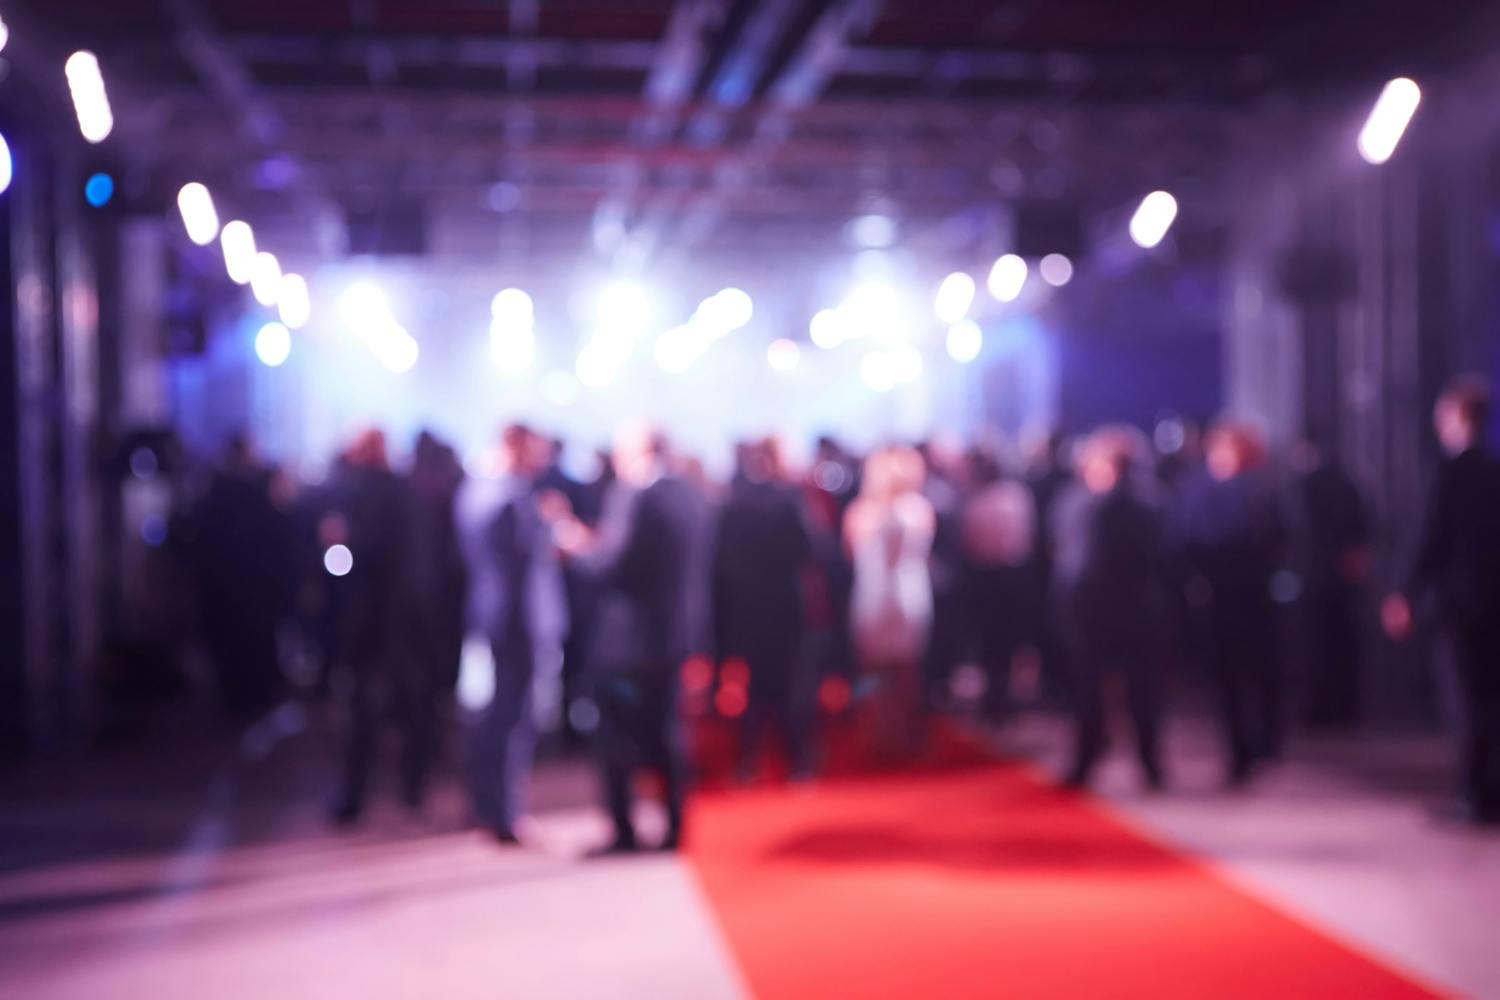 a group of people standing outside a wedding blurred on a red carpet